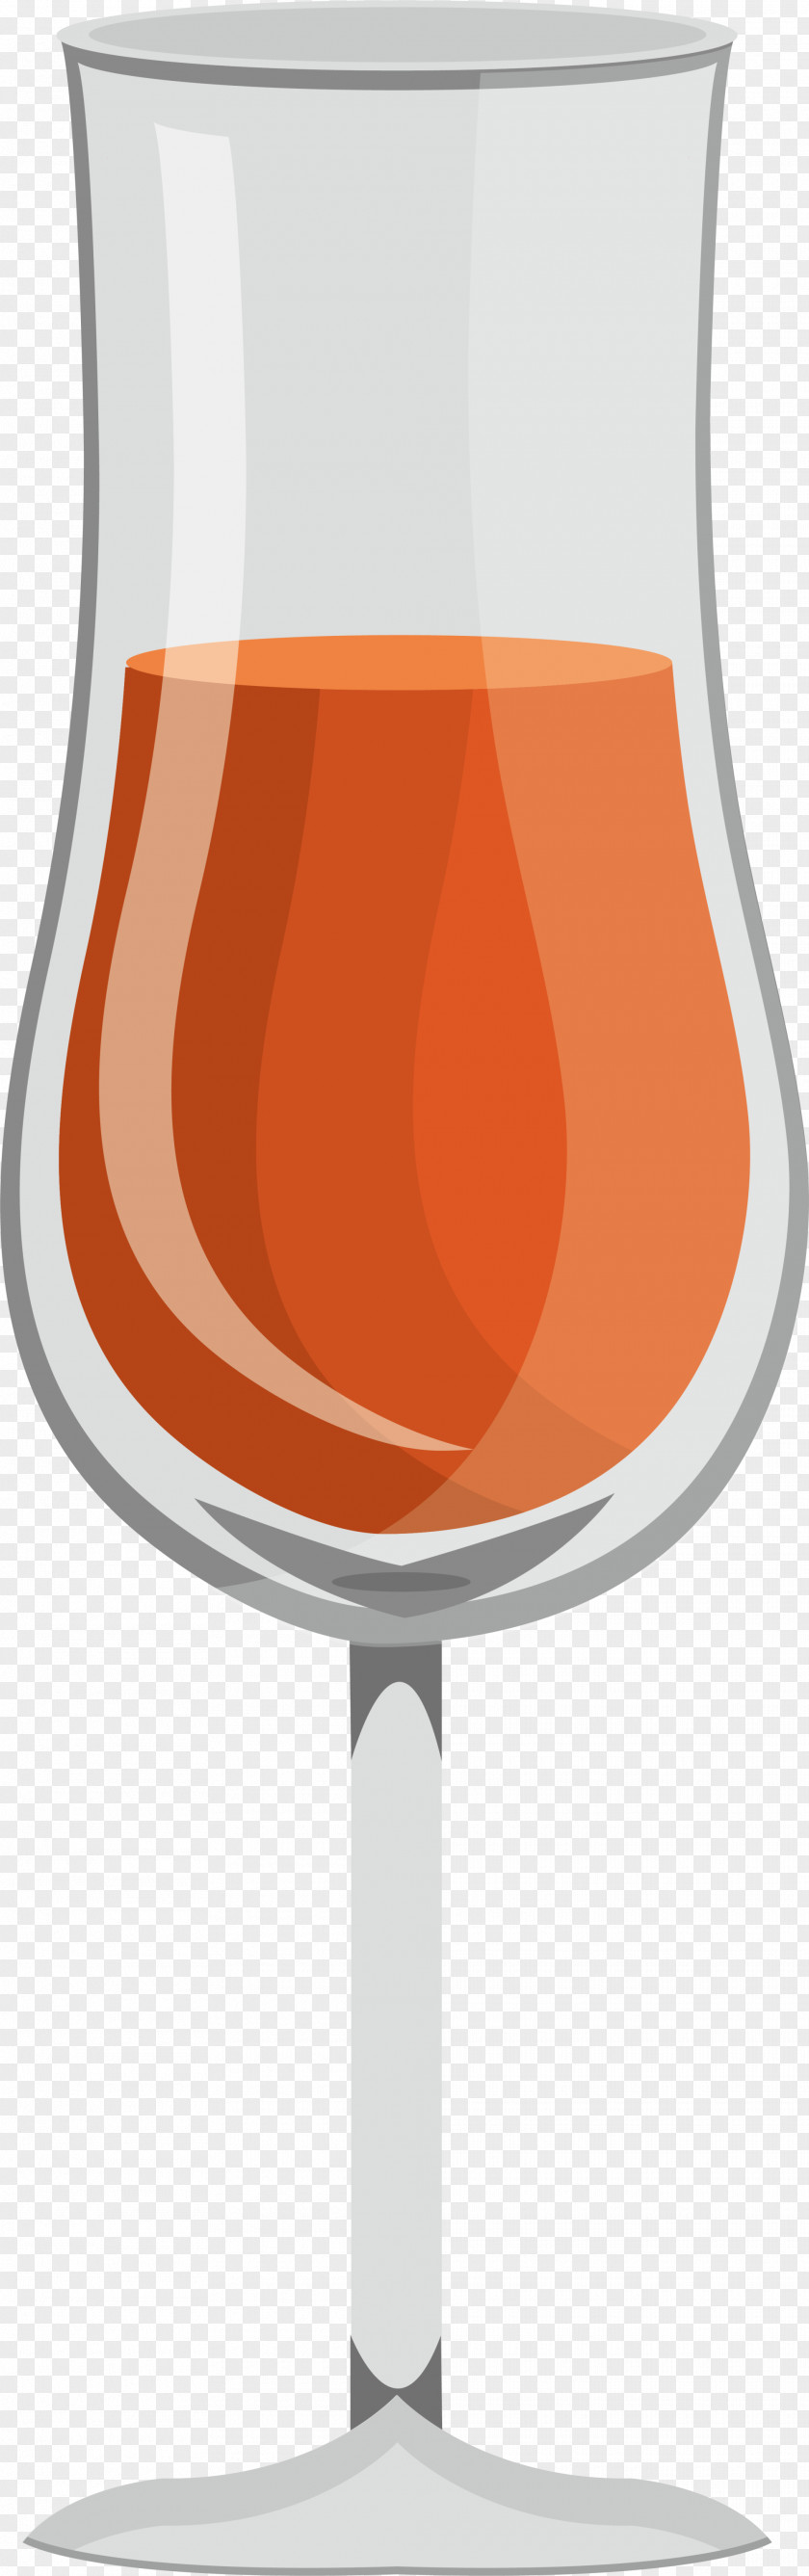 Orange Concise Cup Wine Glass PNG